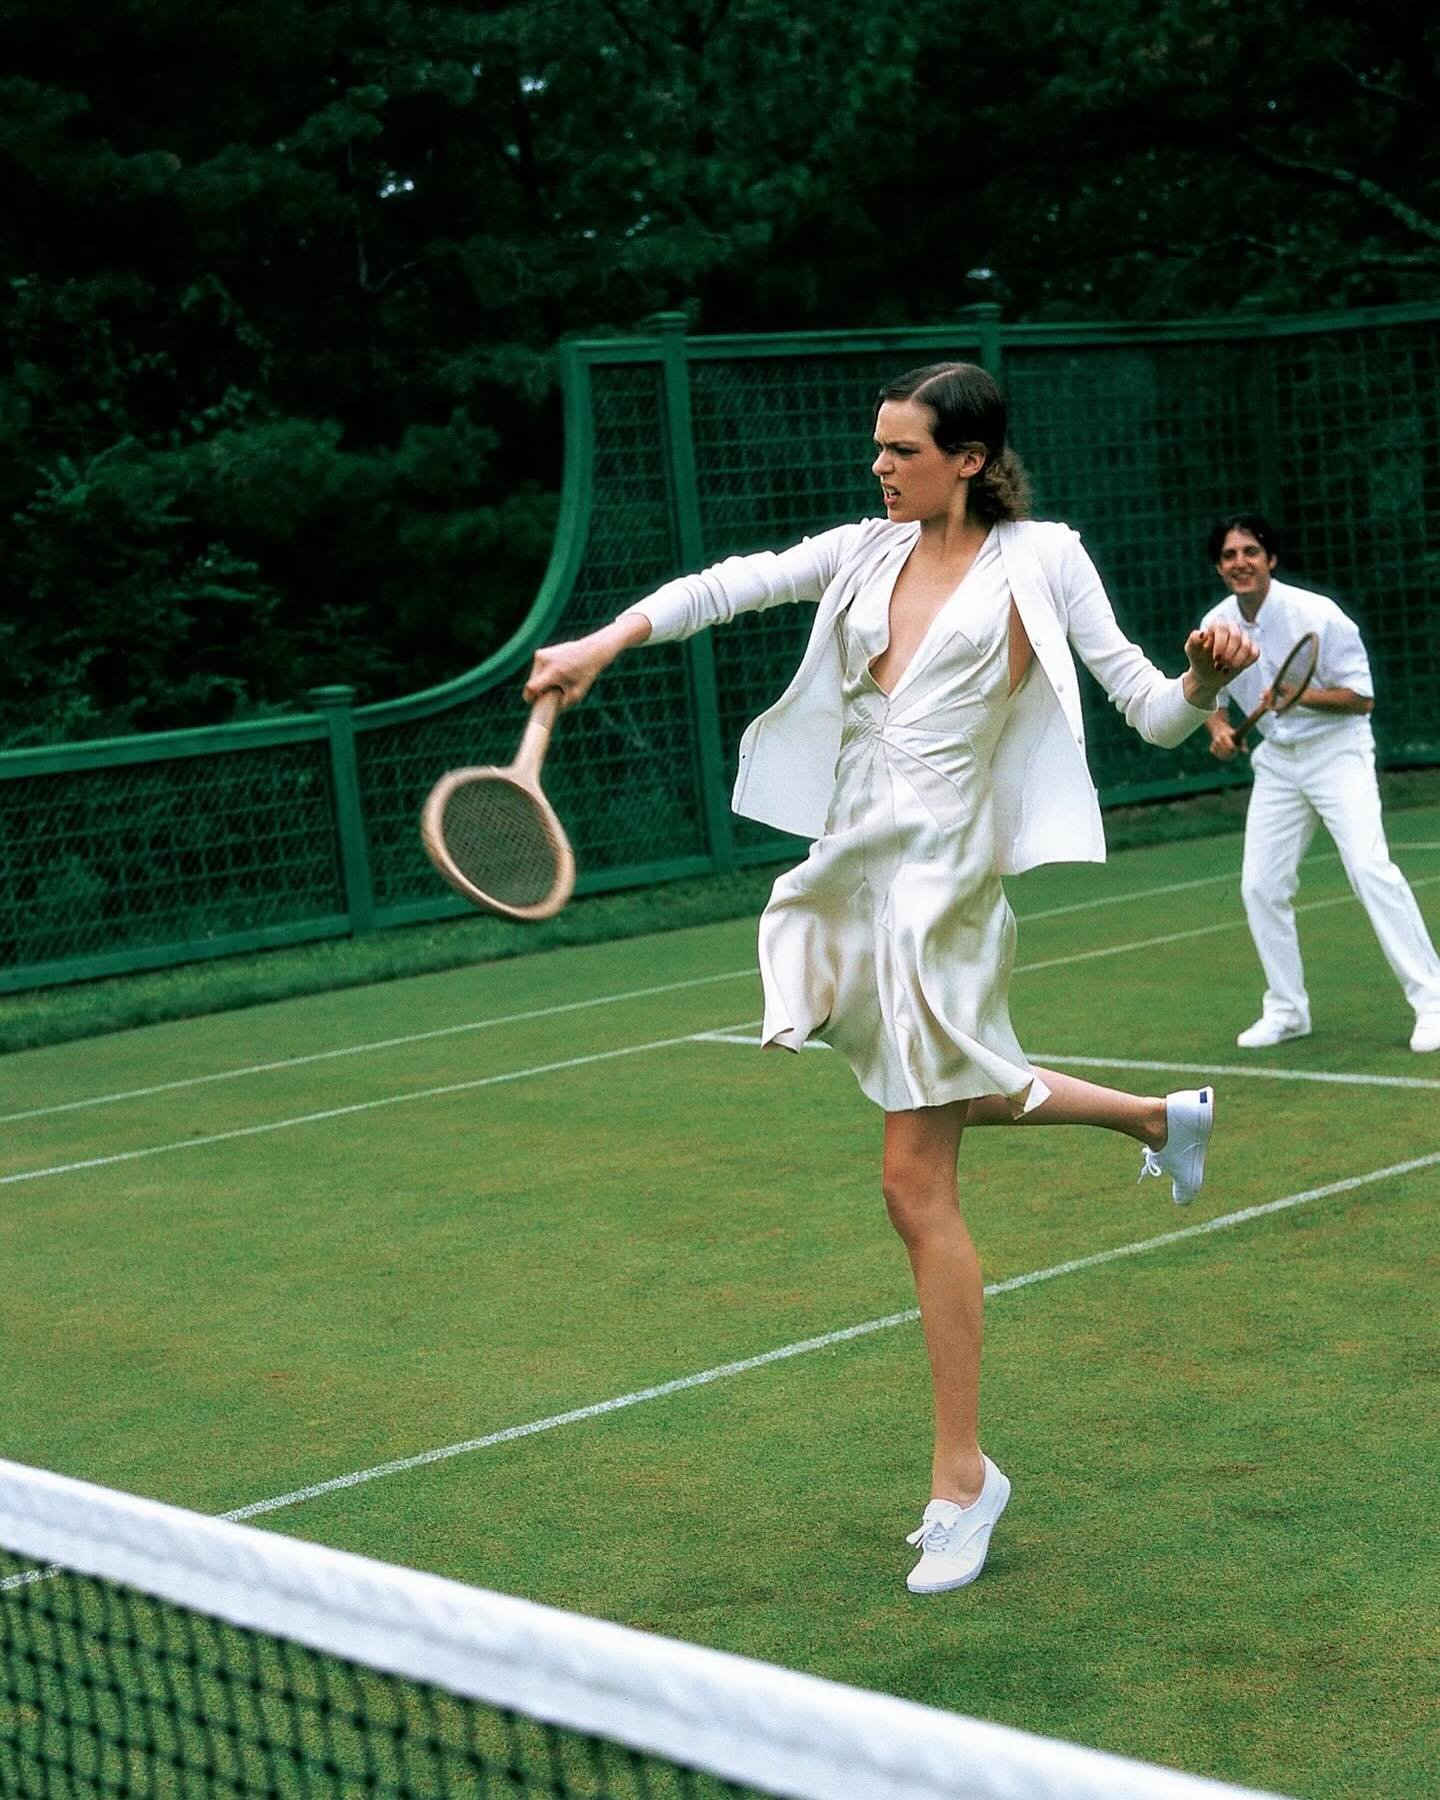 Anyone else fall down a vintage tennis attire rabbit hole recently? 🎾 #tabled #tableddesigns #tenniscore 

Photo by: Arthur Elgort for Vogue